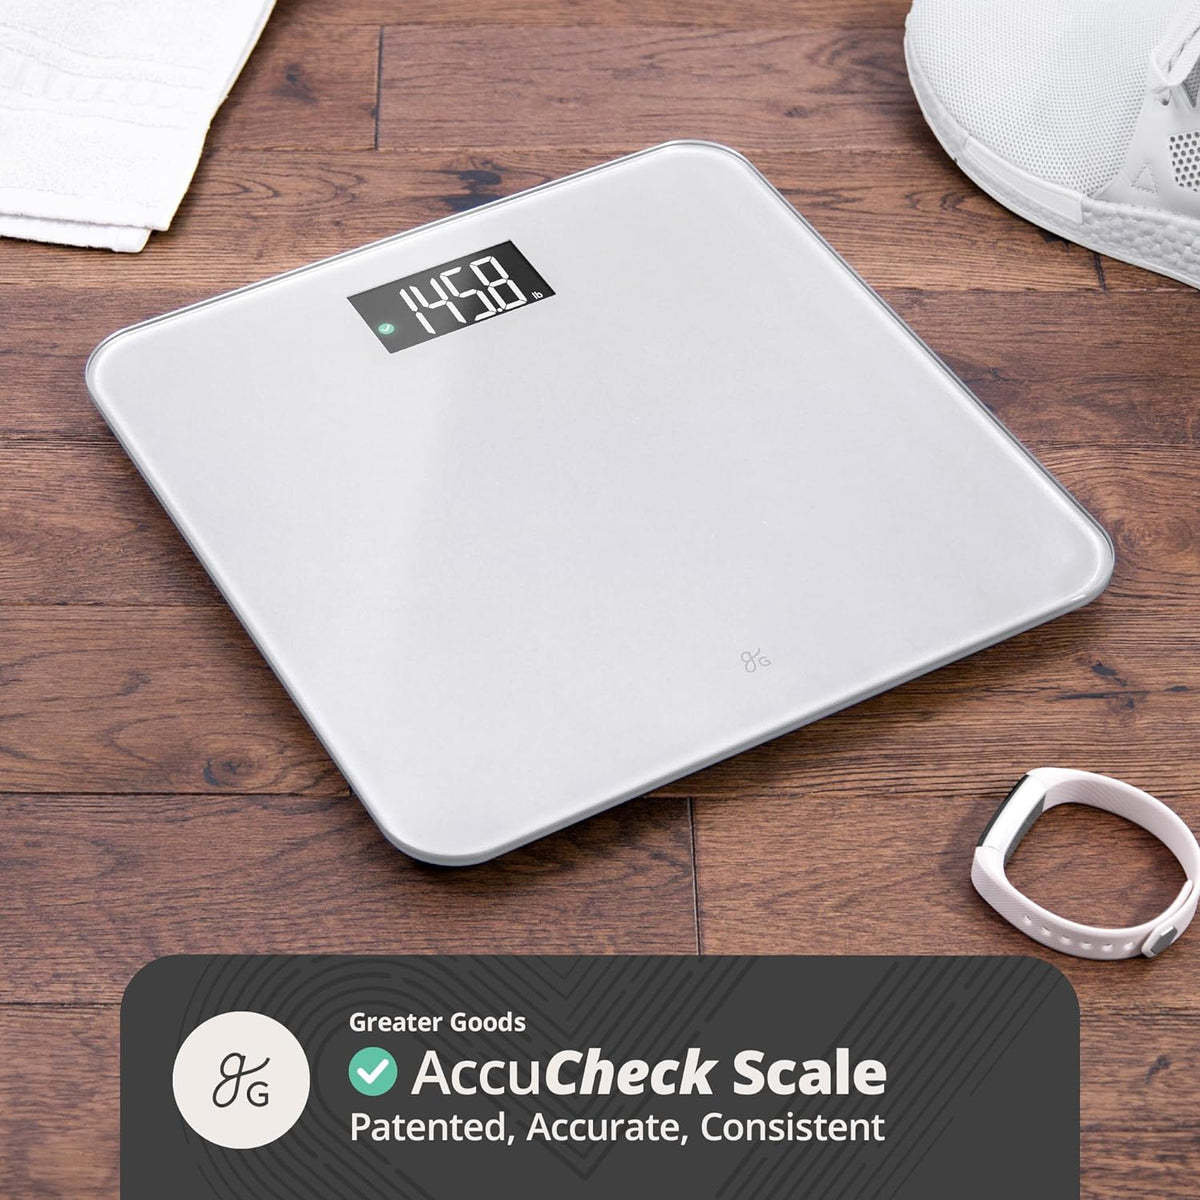 Greater Goods Bathroom Scale with Accucheck and Nutrition Facts Food Scale Bundle, (Gray)